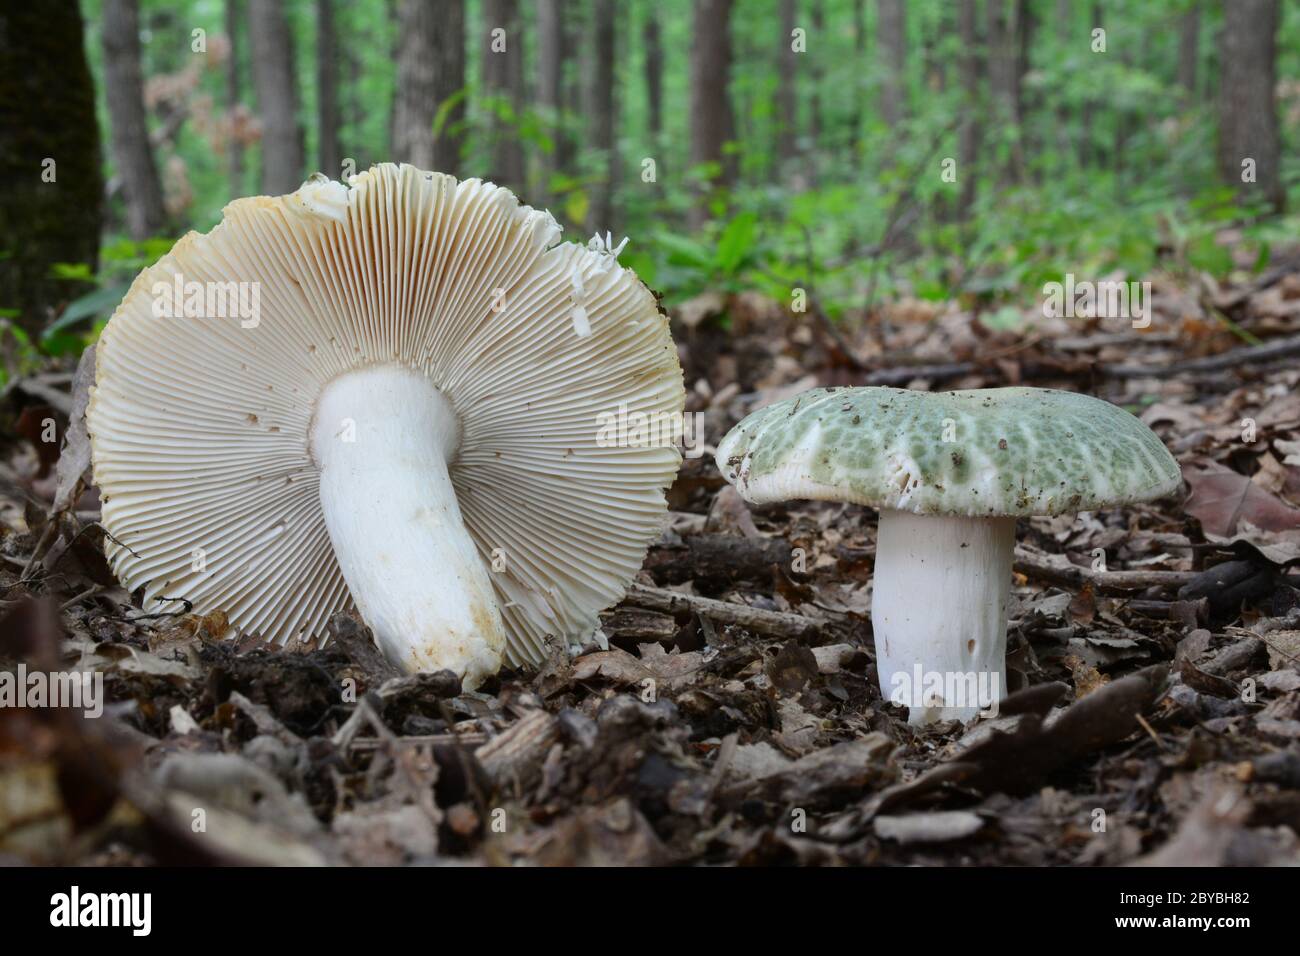 Two Russula virescens or Greencracked brittlegill  mushrooms, left picked up, white gills visible, another in natural position, oak forest in backgrou Stock Photo